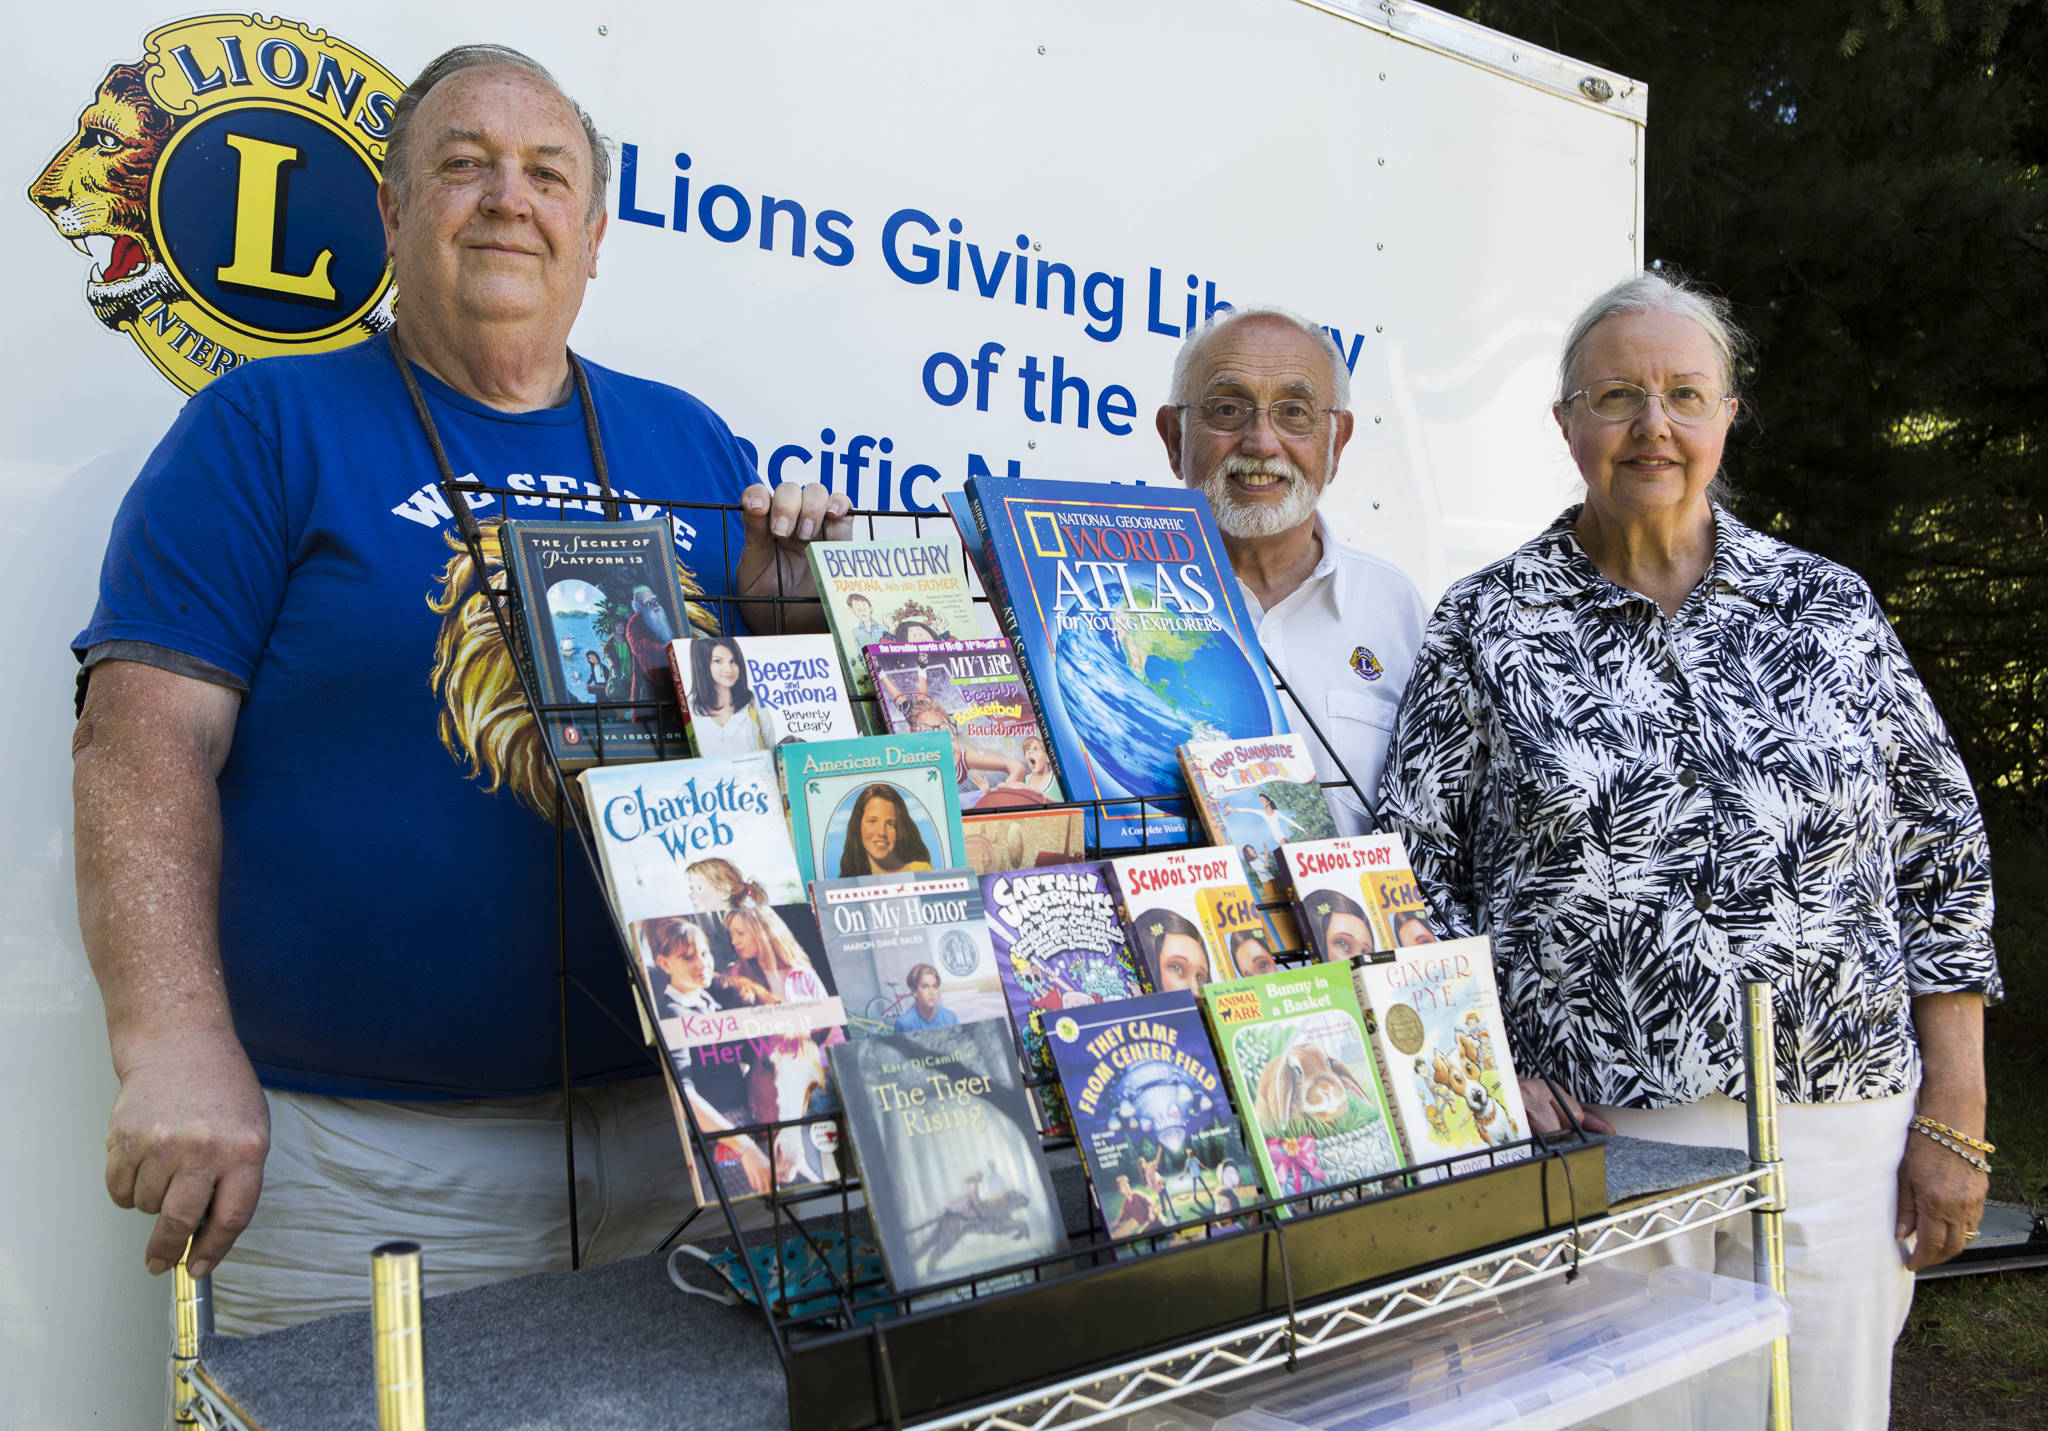 Lions Club members Michael Lally (left), Art Ruben and Judith Ruben with a selection of their donated books on Tuesday in Tulalip. (Olivia Vanni / The Herald)